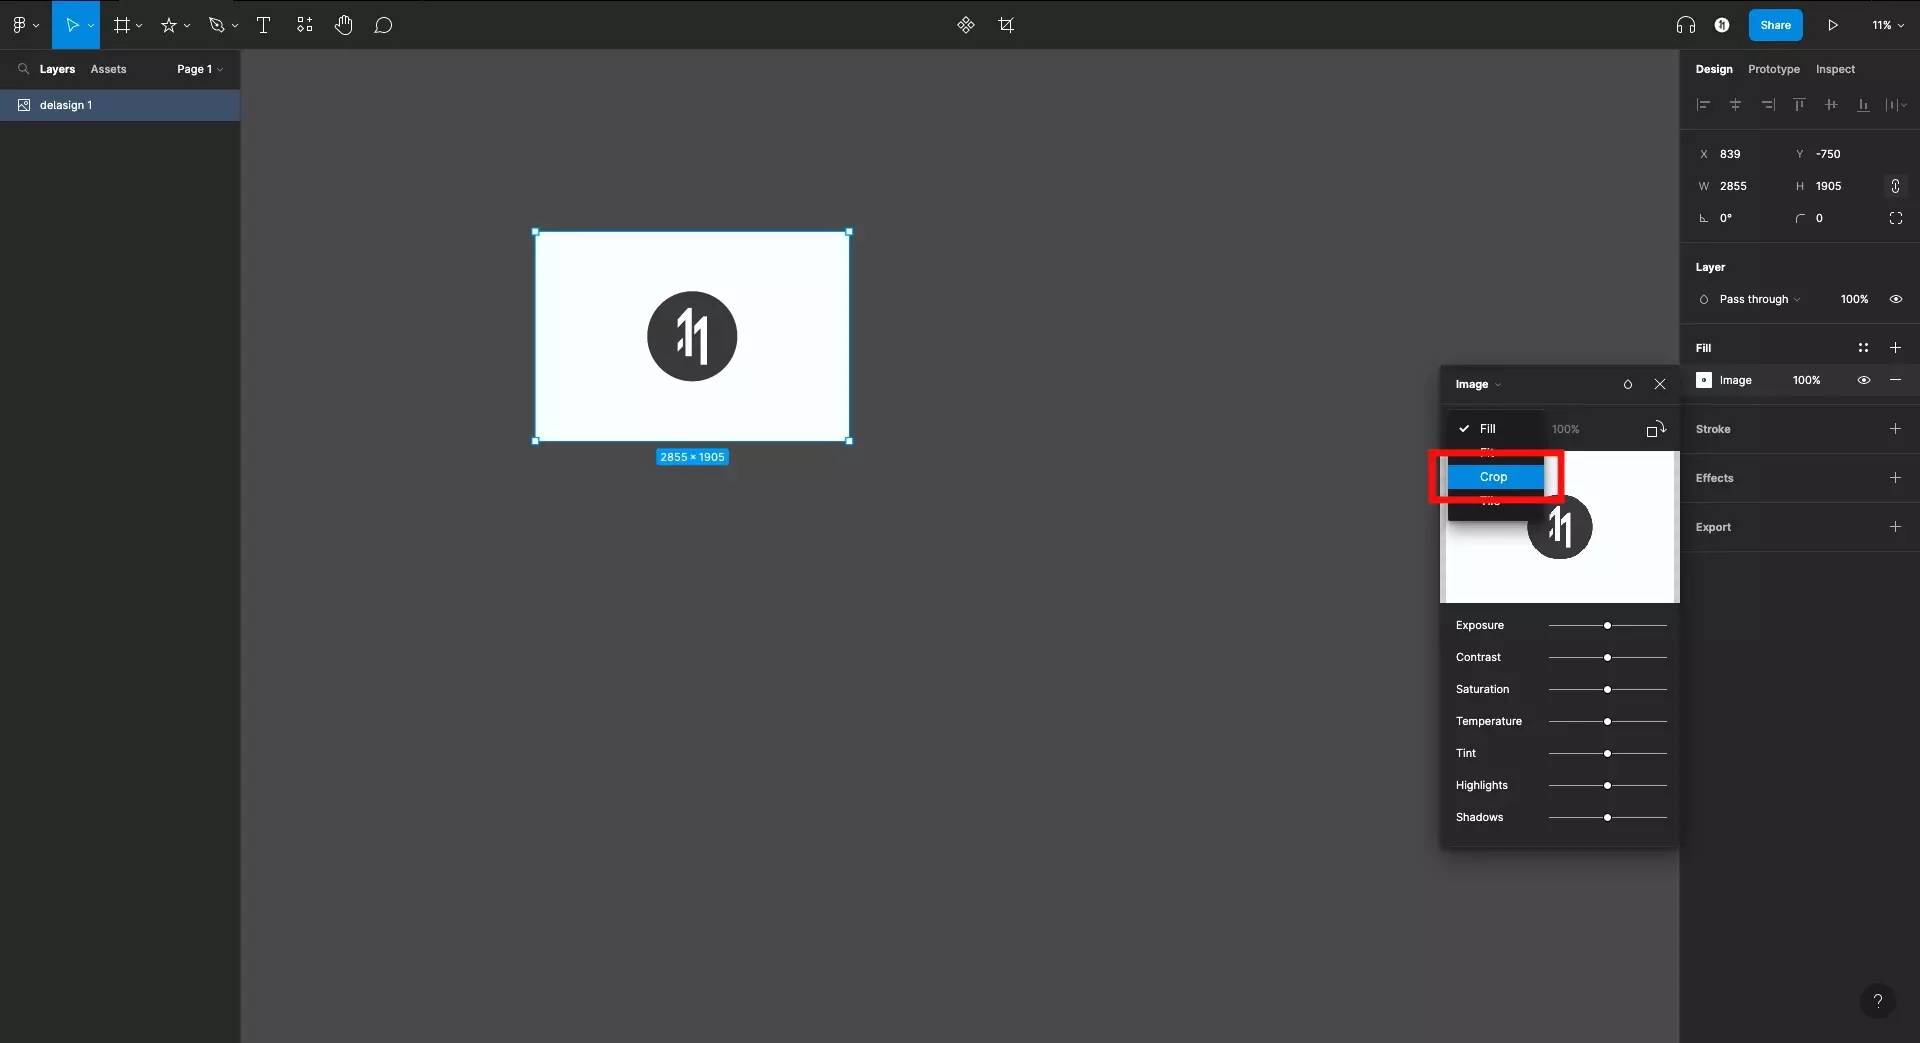 A screenshot of Figma with Crop highlighted in the image pop up menu dropdown which is initially titled fill.